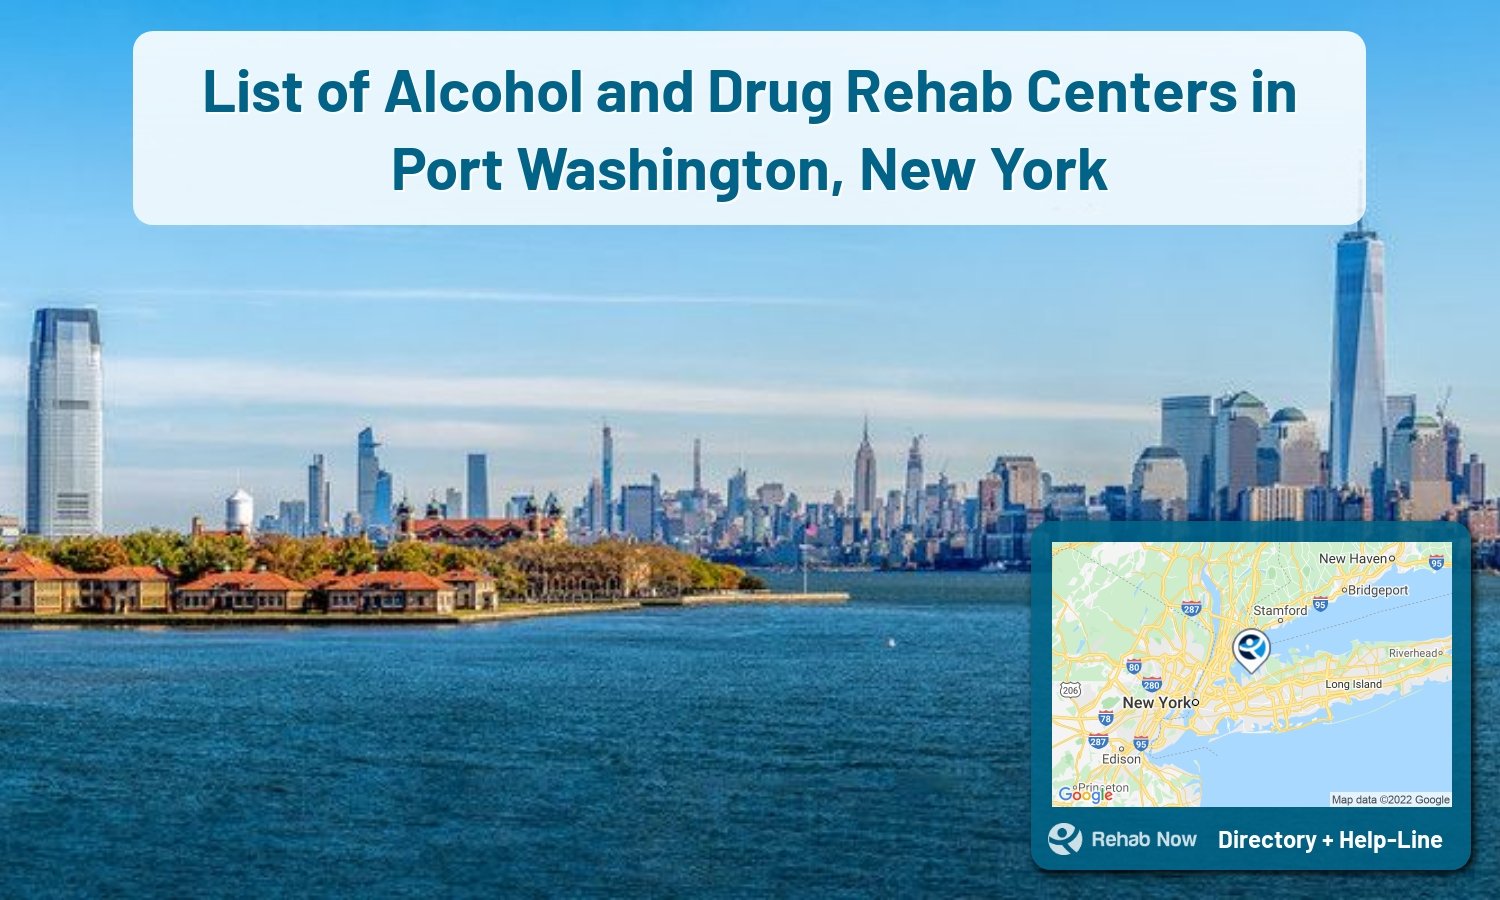 Our experts can help you find treatment now in Port Washington, New York. We list drug rehab and alcohol centers in New York.